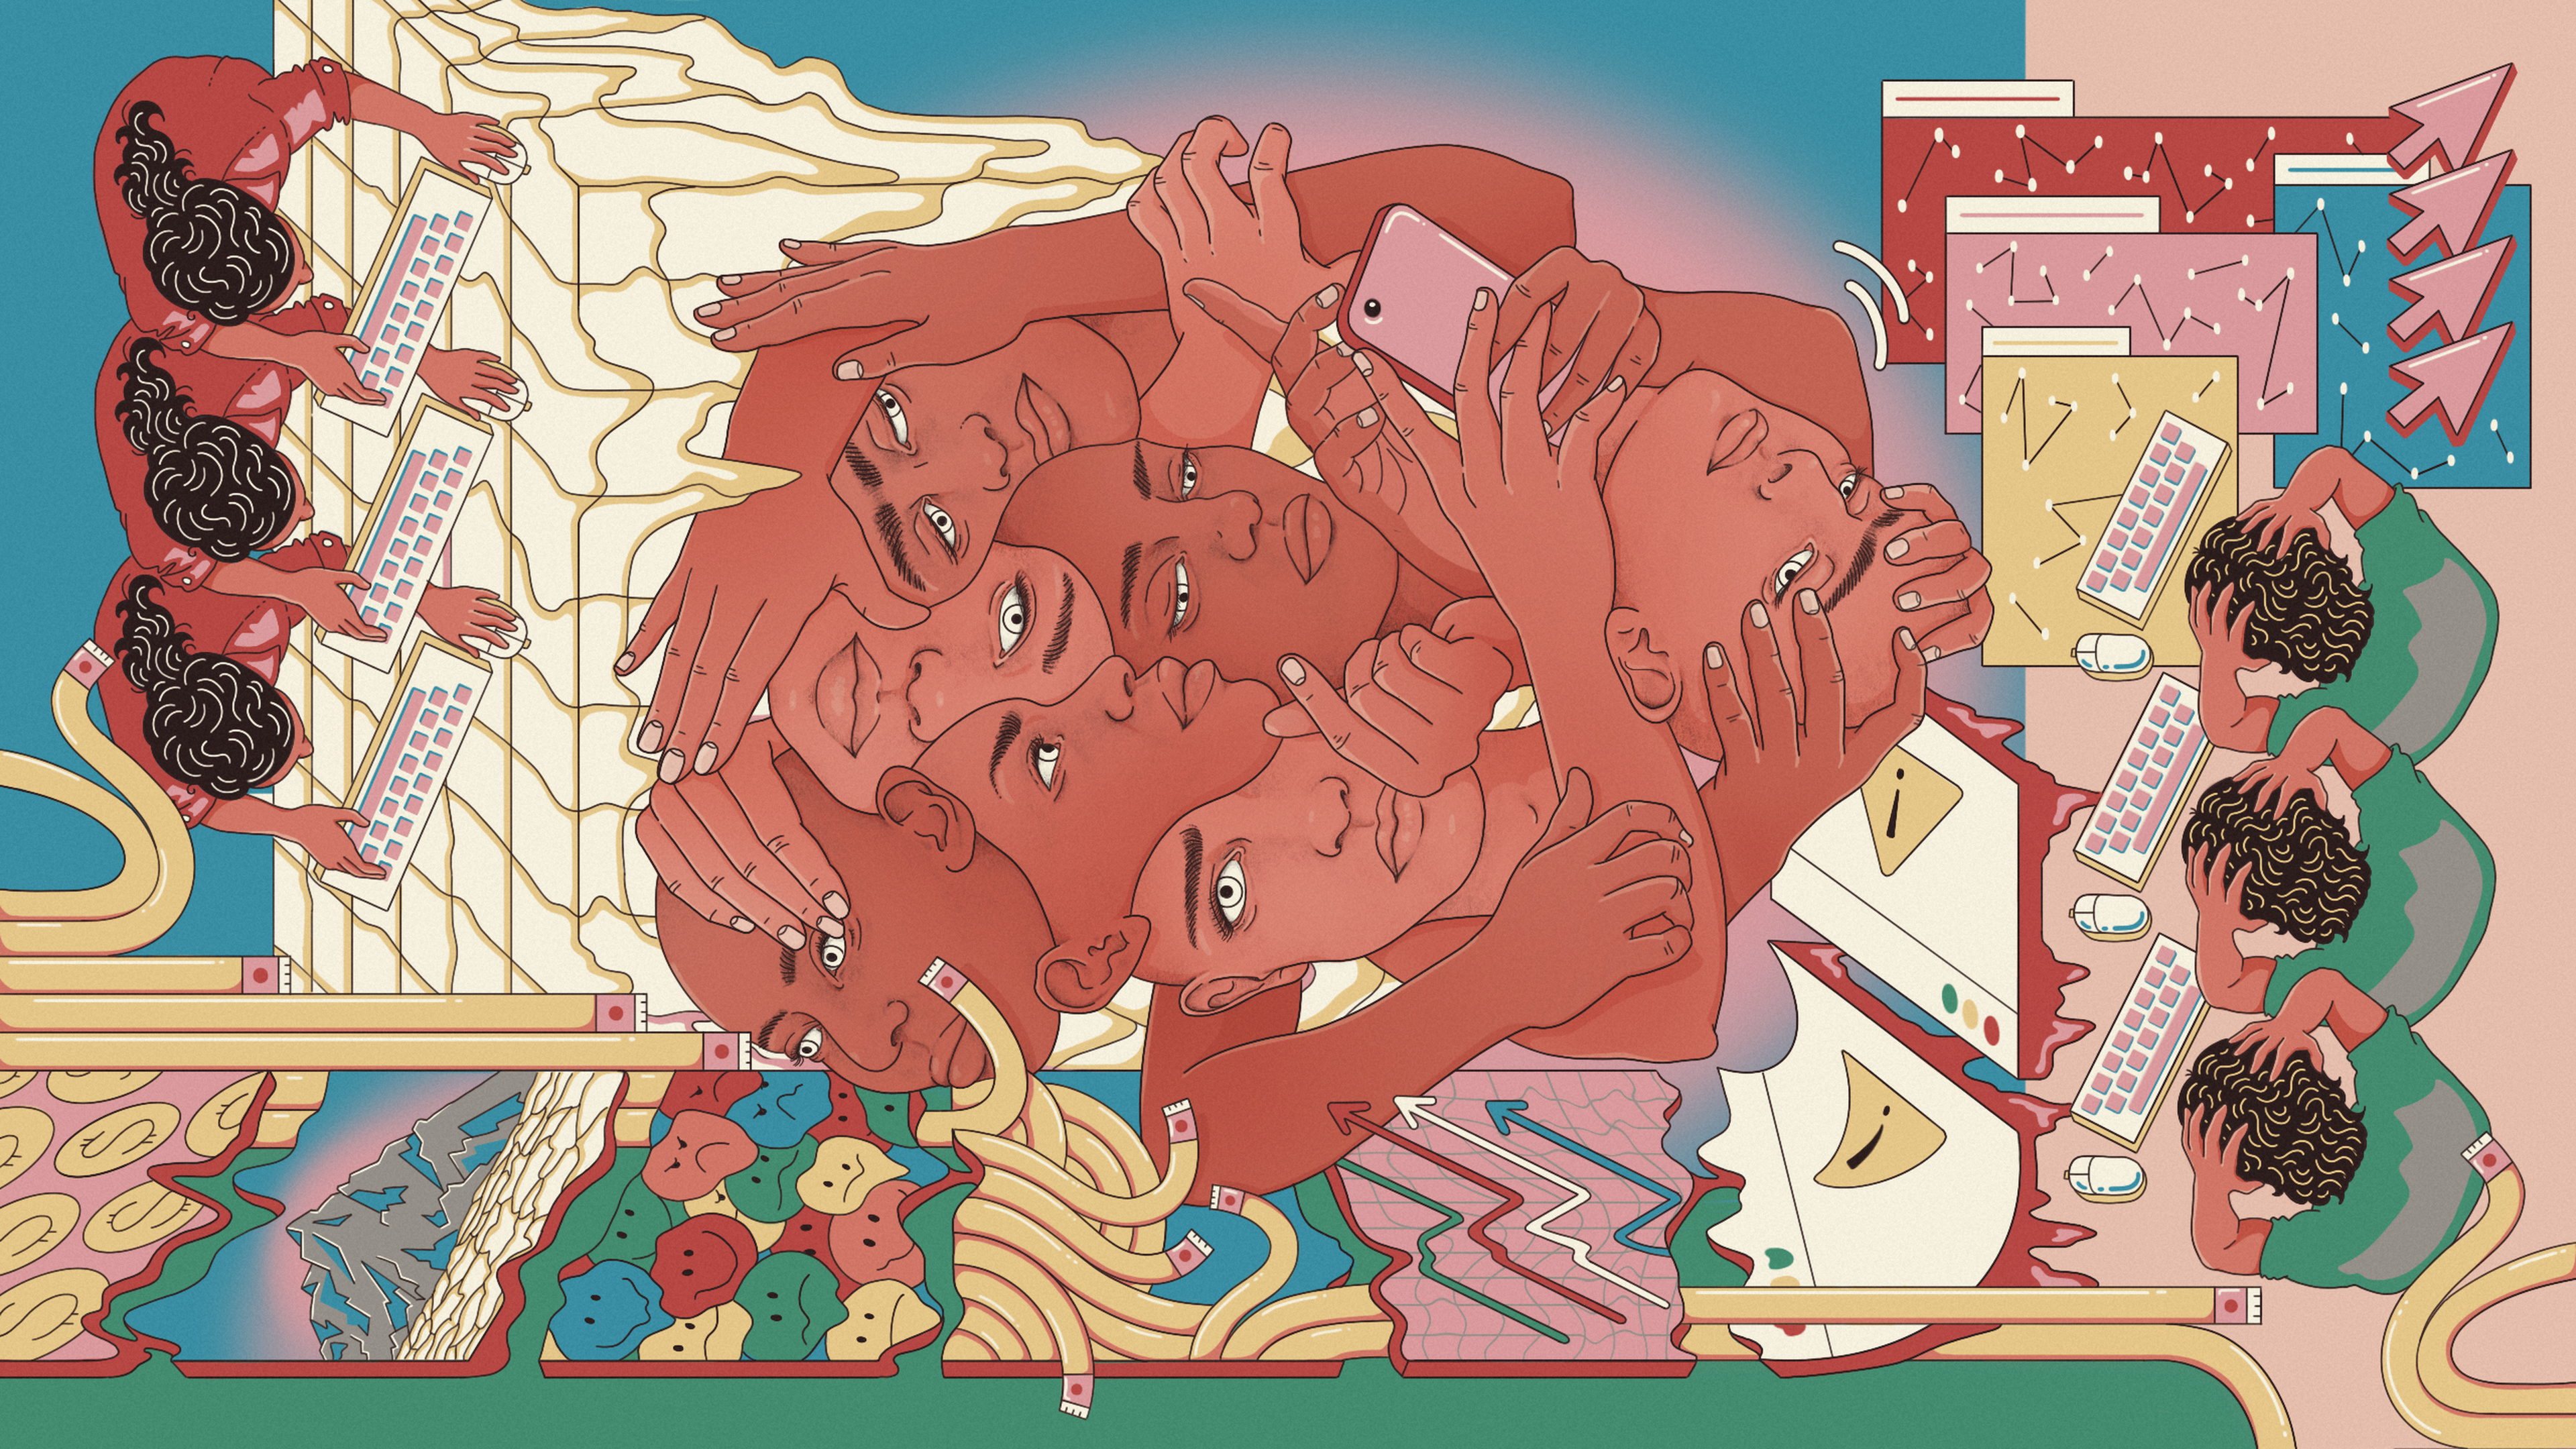 A brightly coloured illustration which can be viewed in any direction. It has several scenes within it: people in front of computers seeming stressed, a number of faces overlaid over each other, squashed emojis and other motifs.